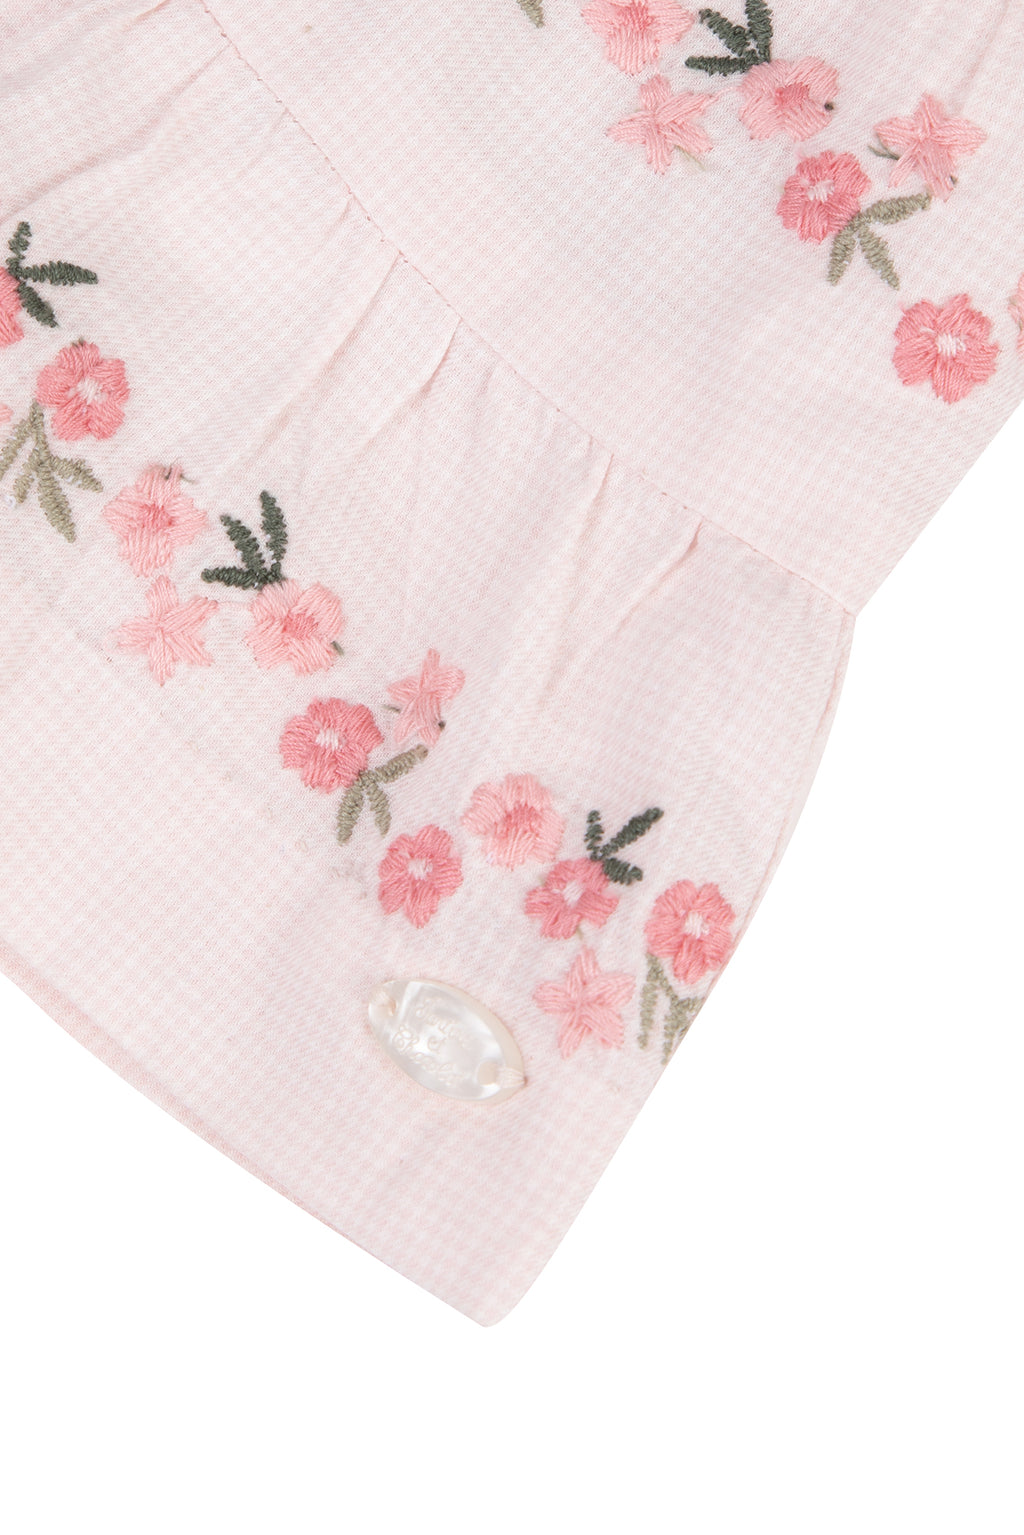 Dress - Pale pink Two-tone gingham